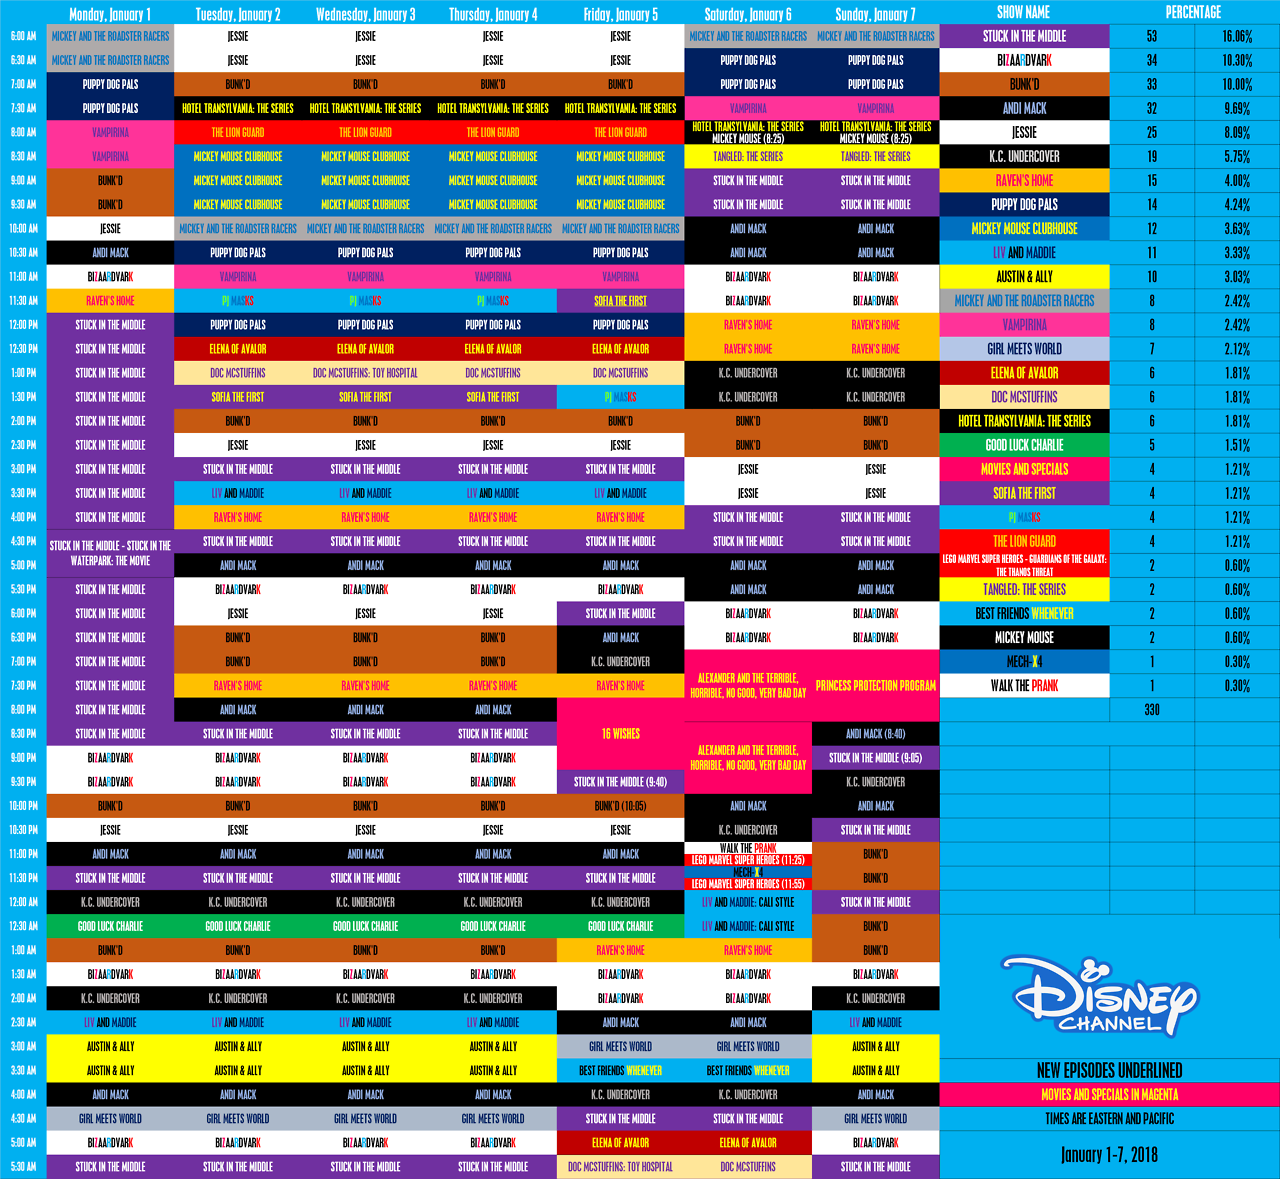 50 best ideas for coloring Disney Channel Schedule